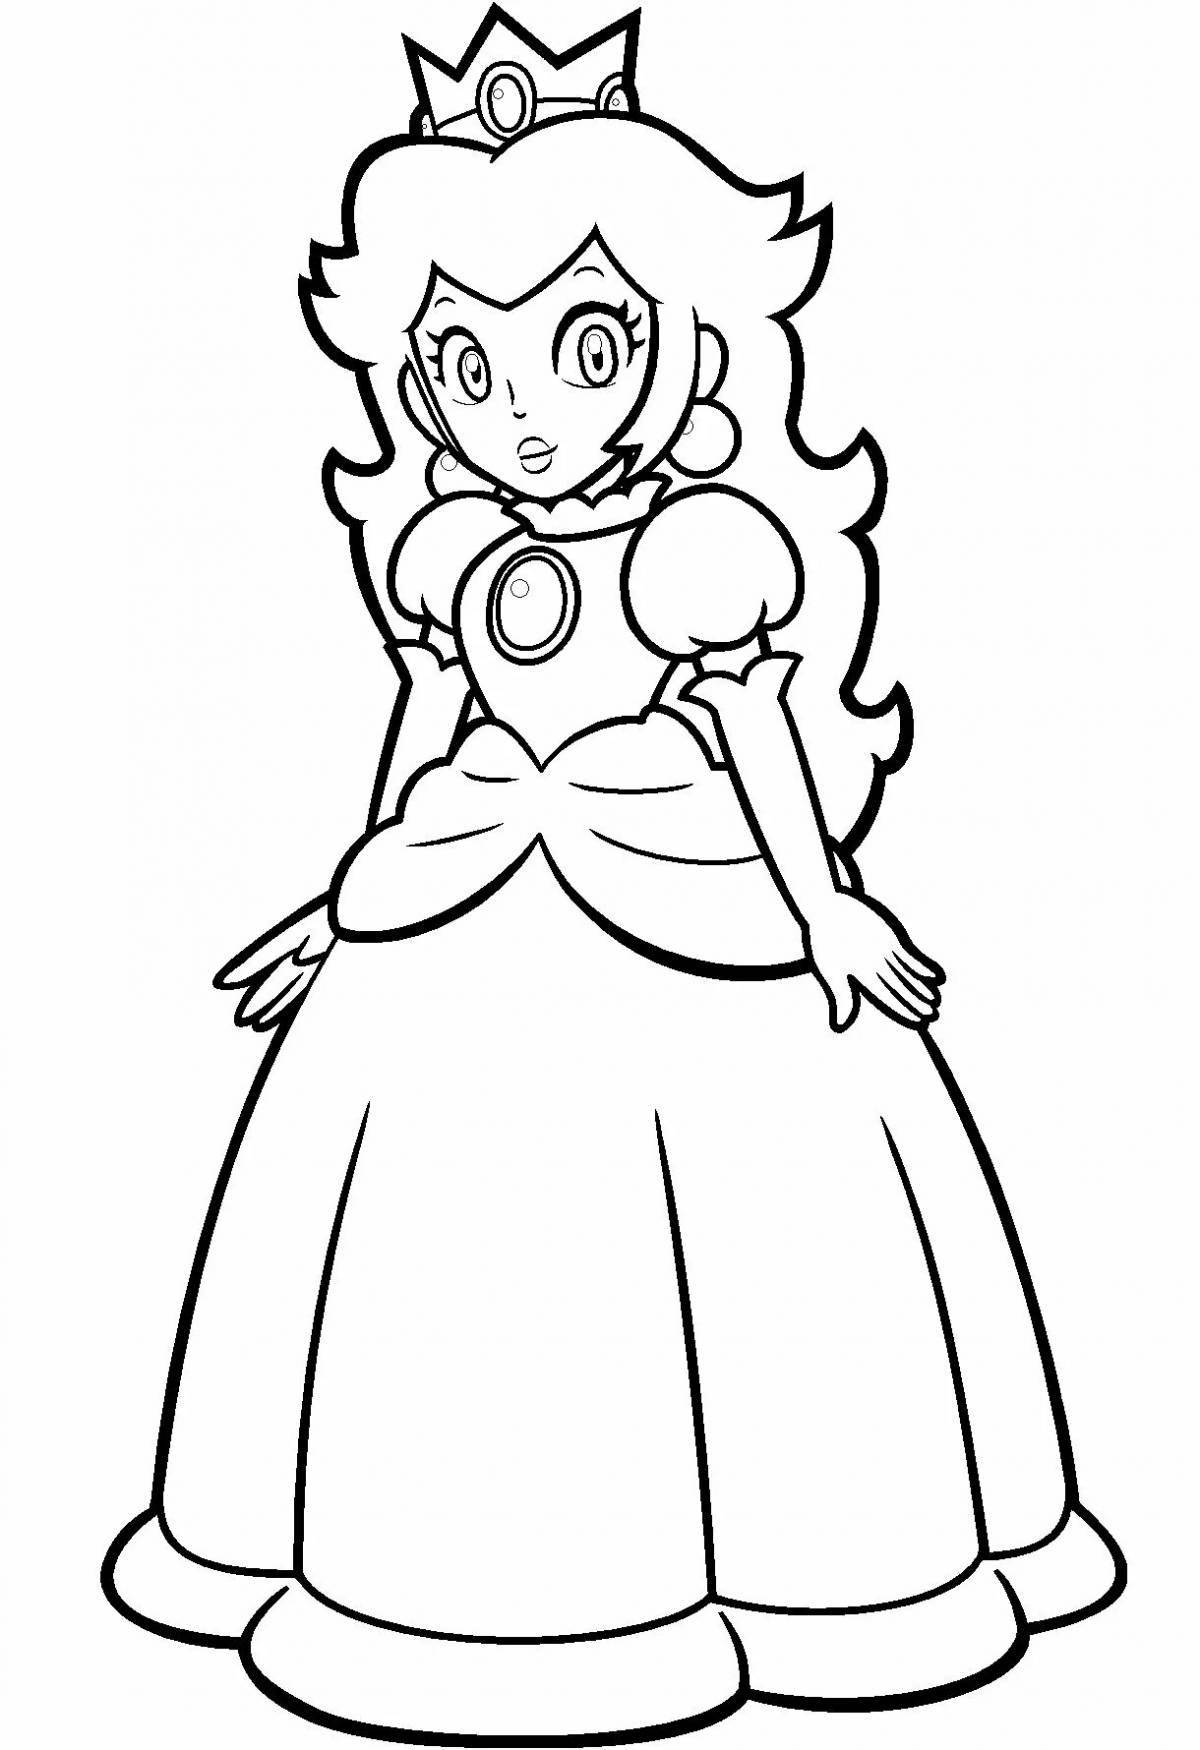 Exalted peach princess coloring book